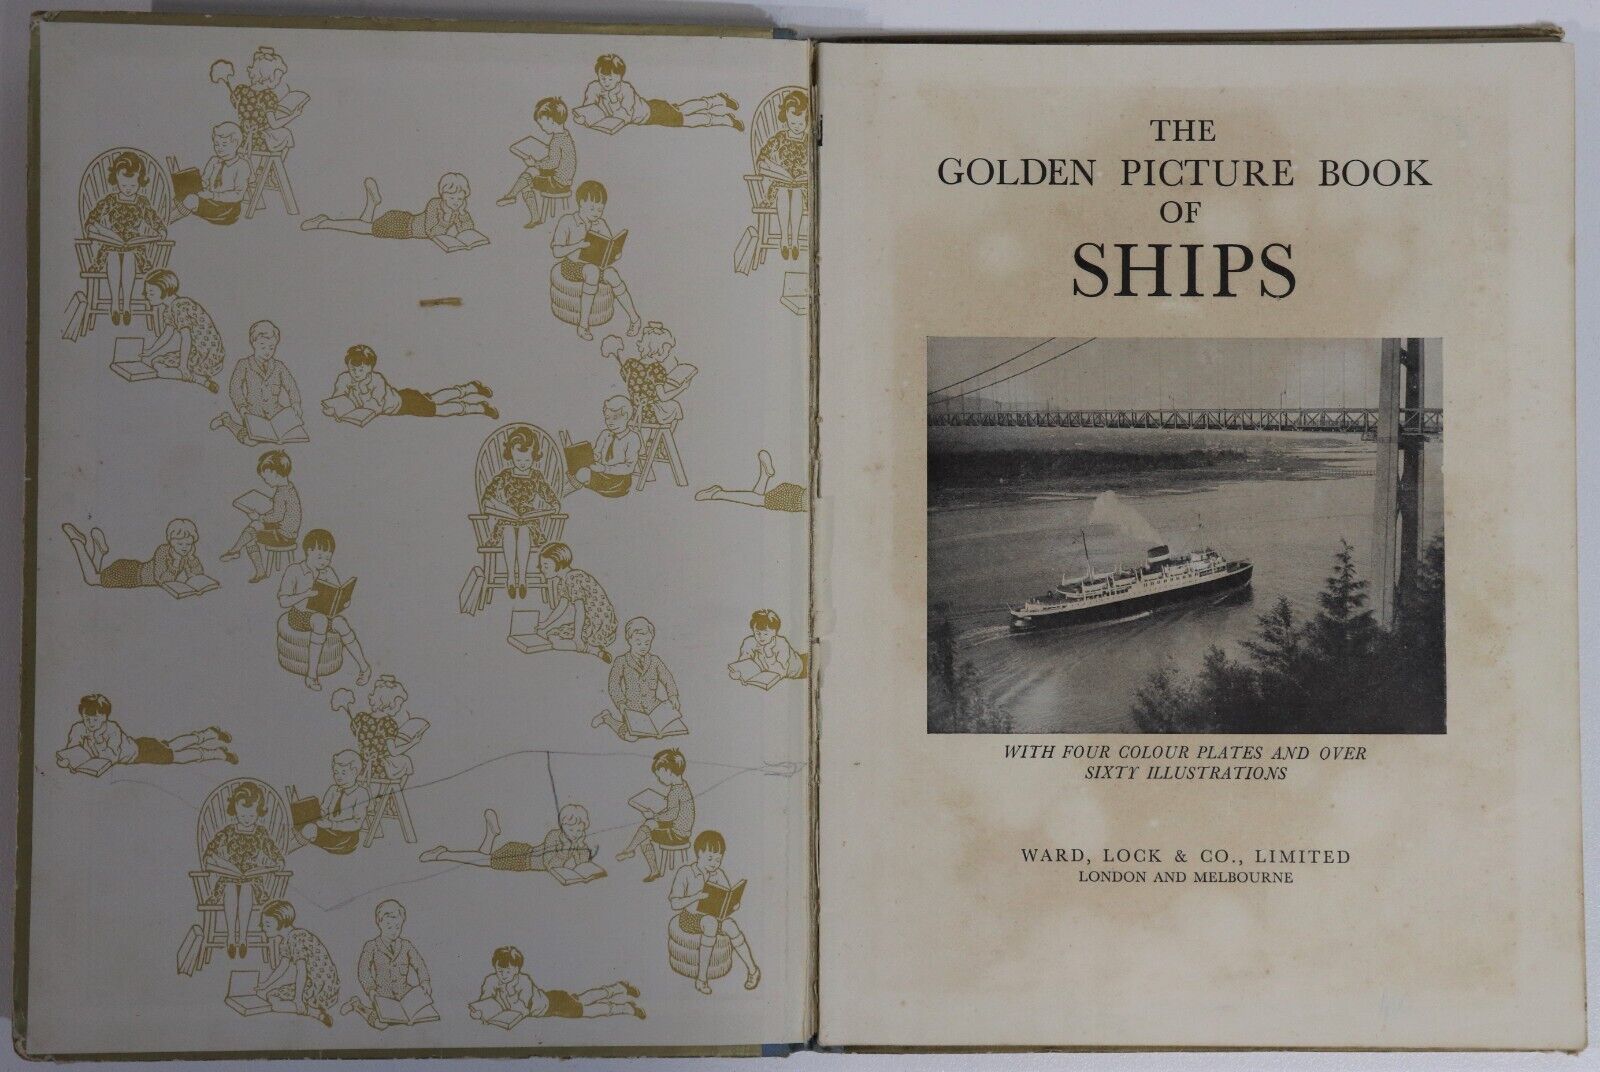 The Golden Picture Book Of Ships - c1949 - Antique Children's Maritime Book - 0